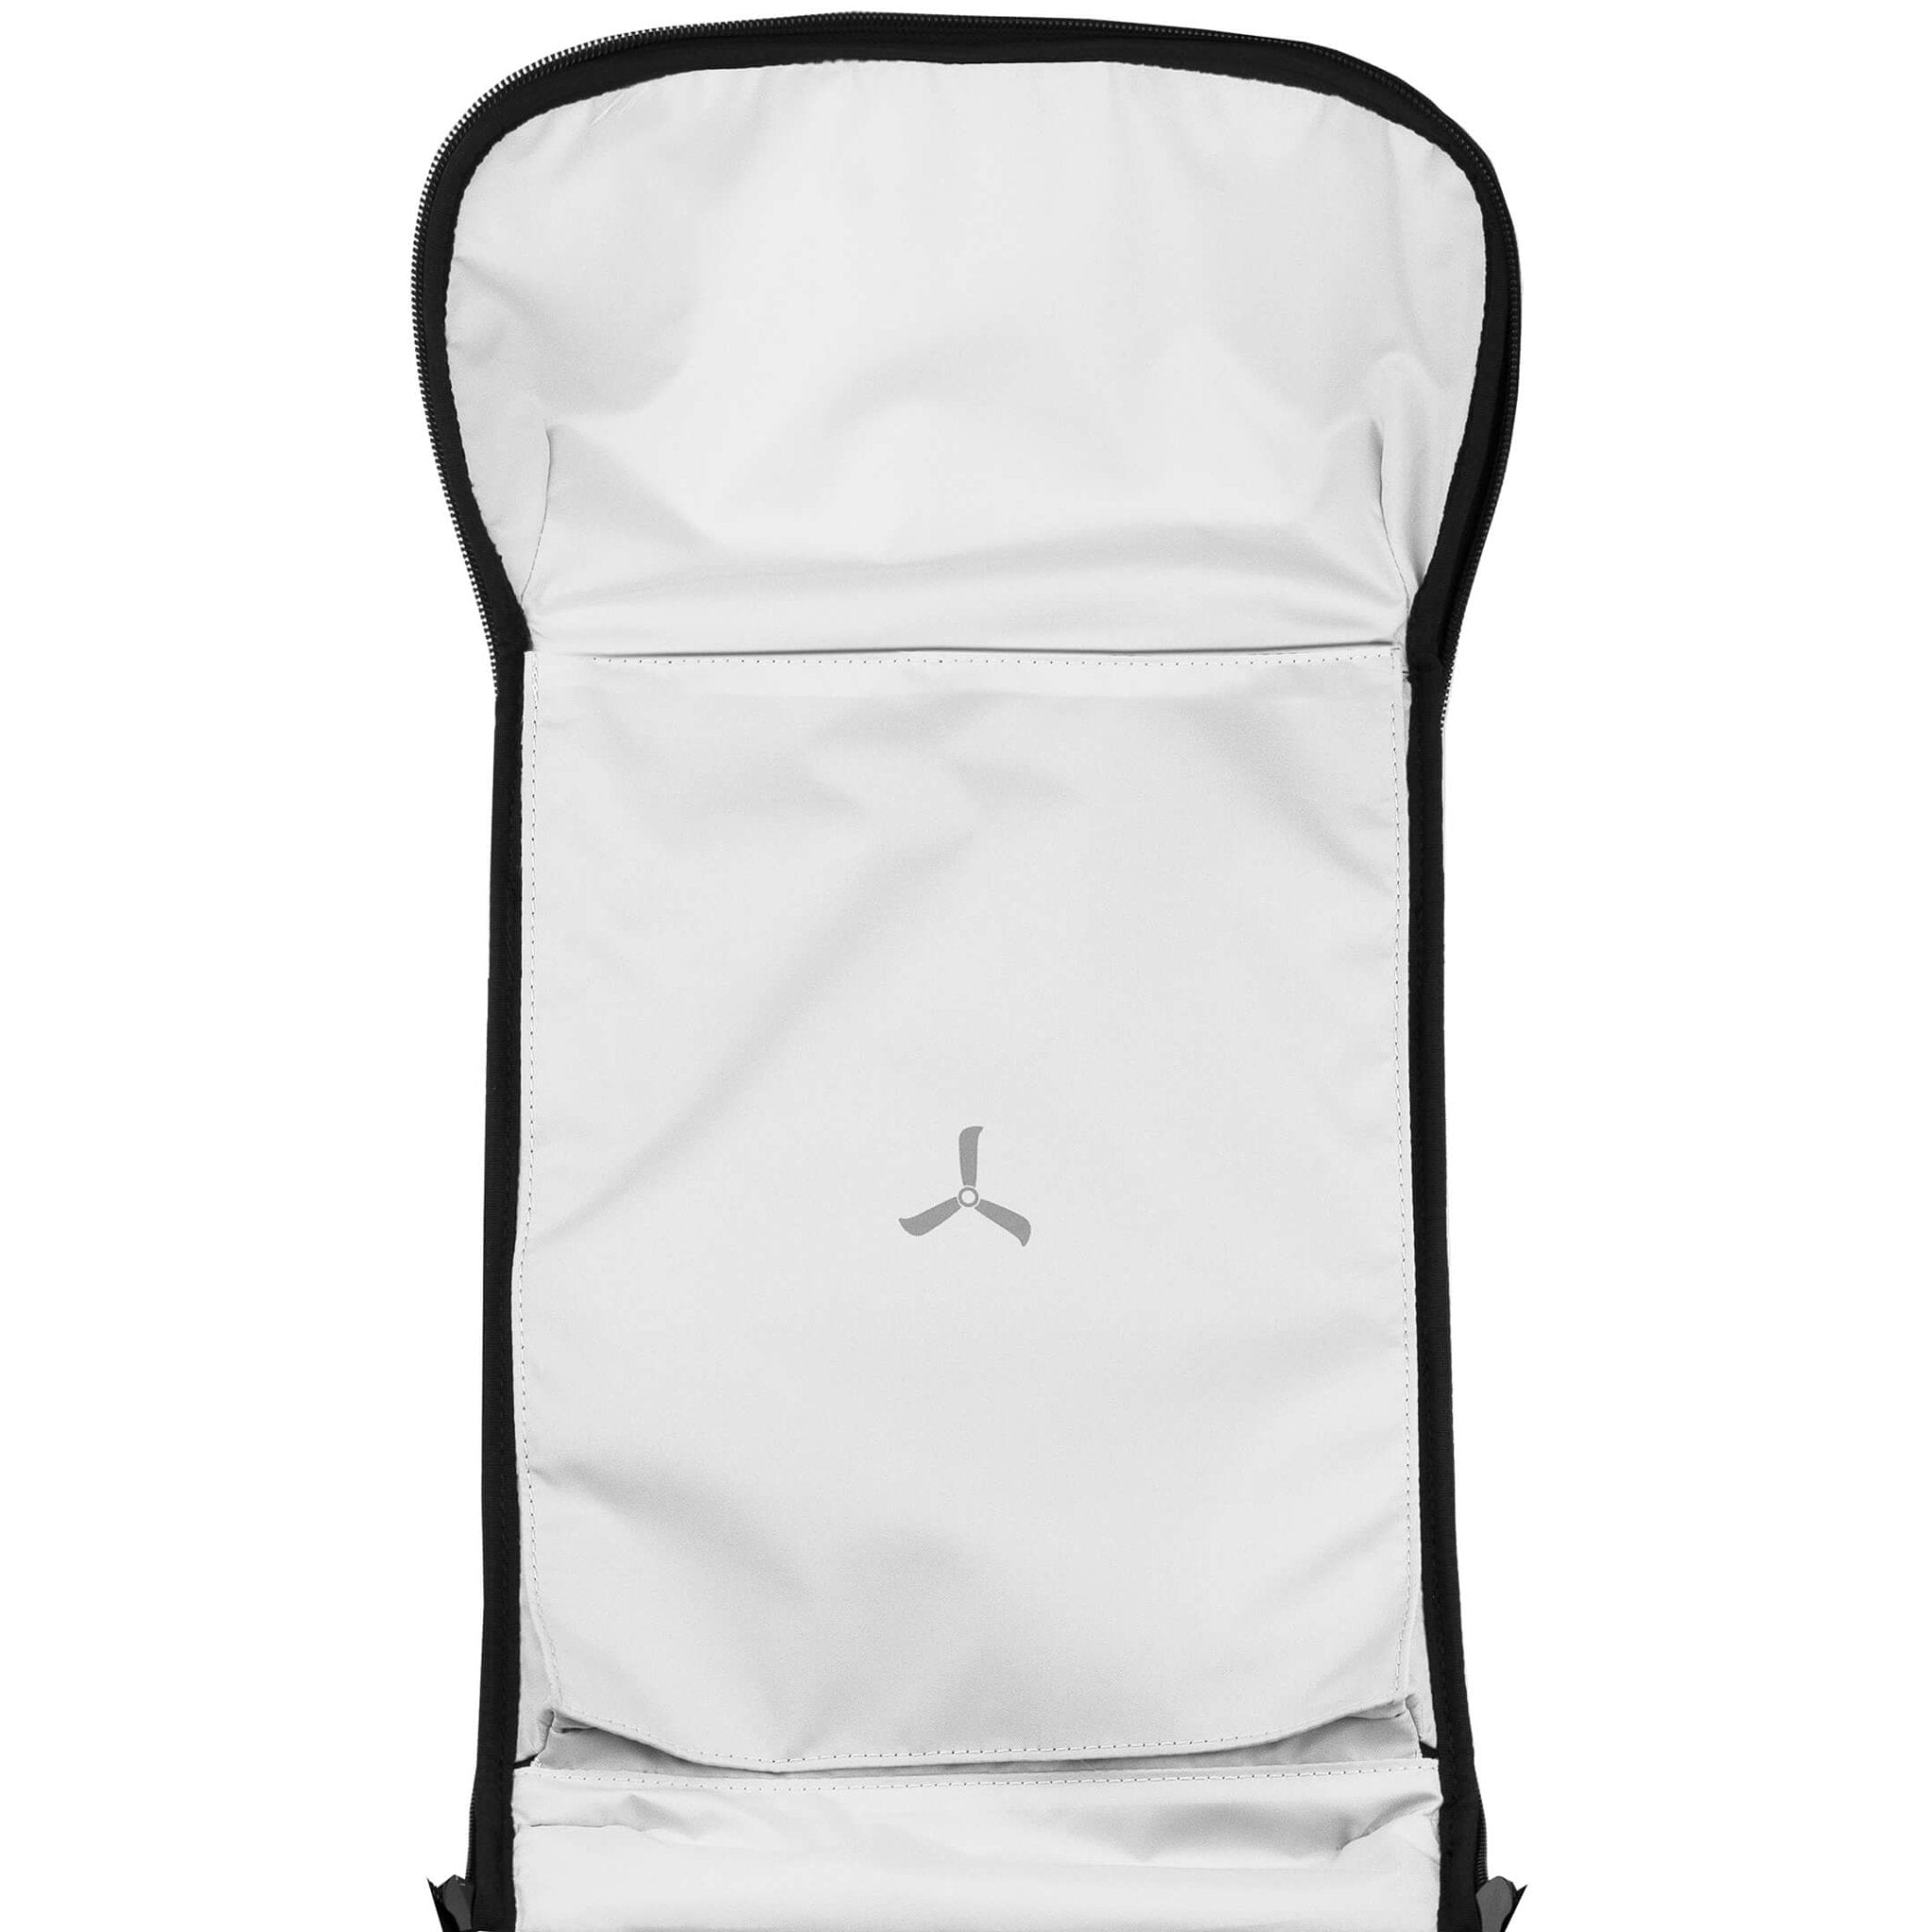 Torvol Urban Backpack - The Ultimate Daily Backpack 11 - Torvol - Drone Authority